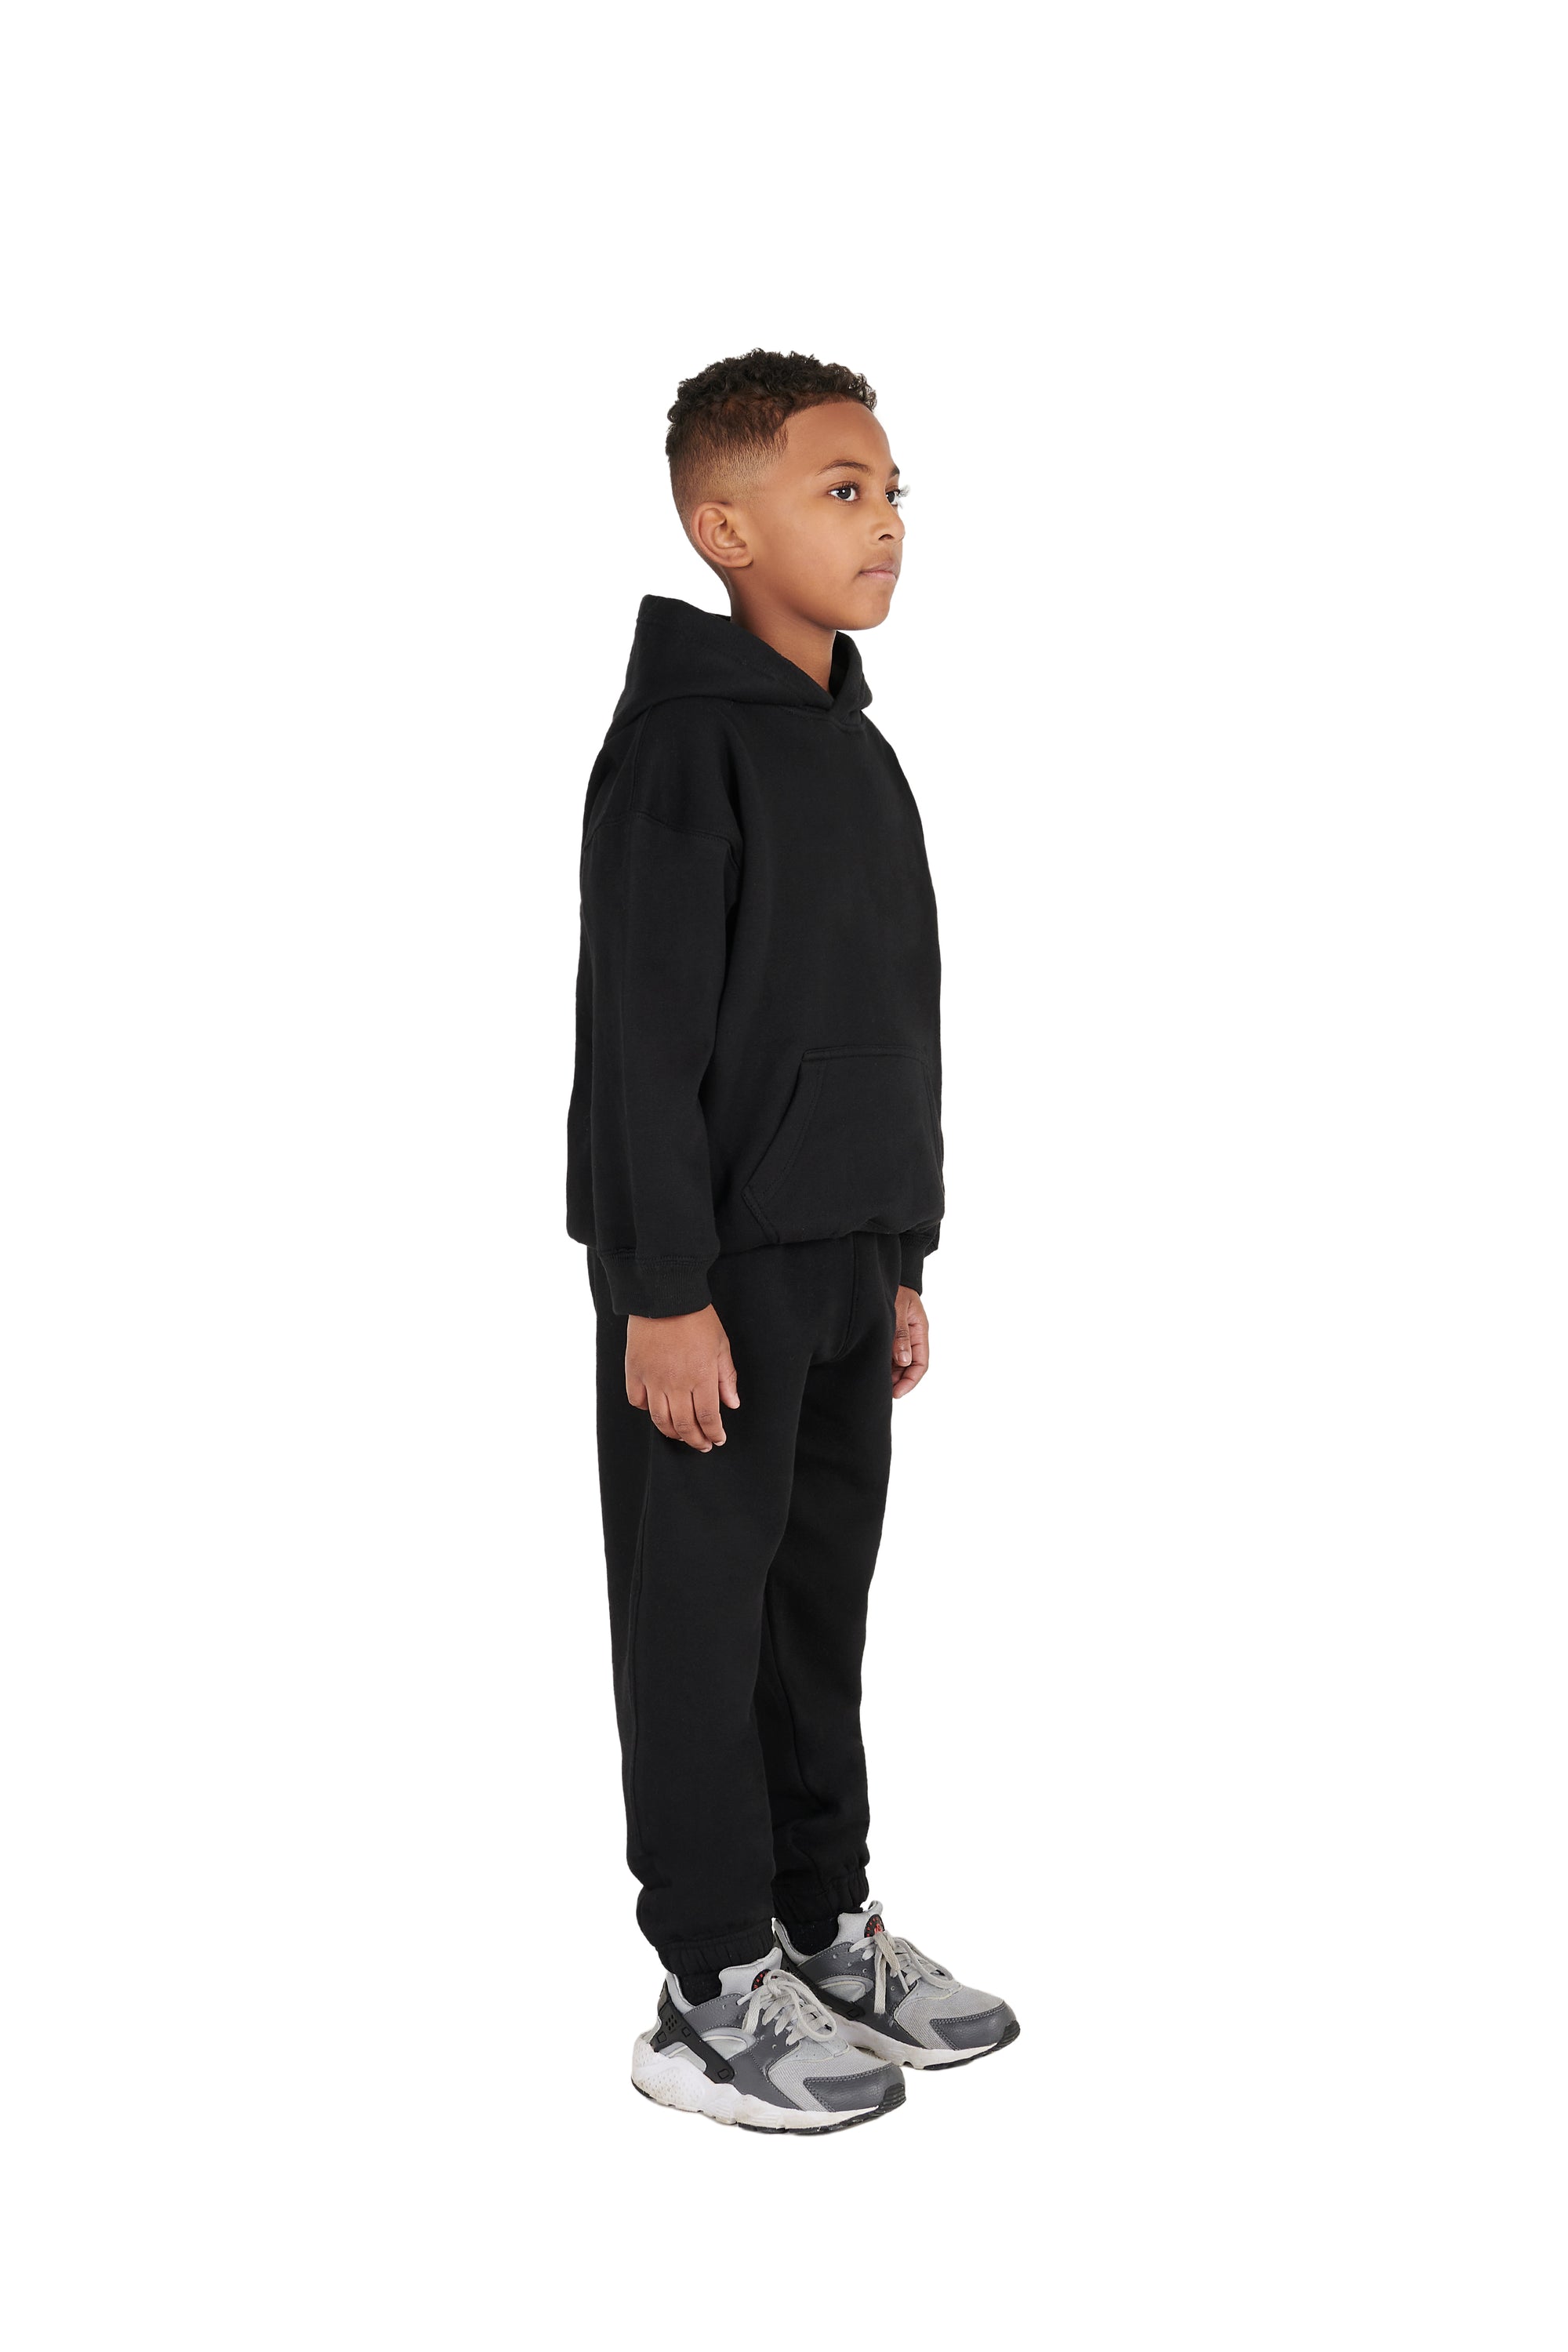  TLAENSON Boys Cargo Pants Kids Twill Jogger for Youths